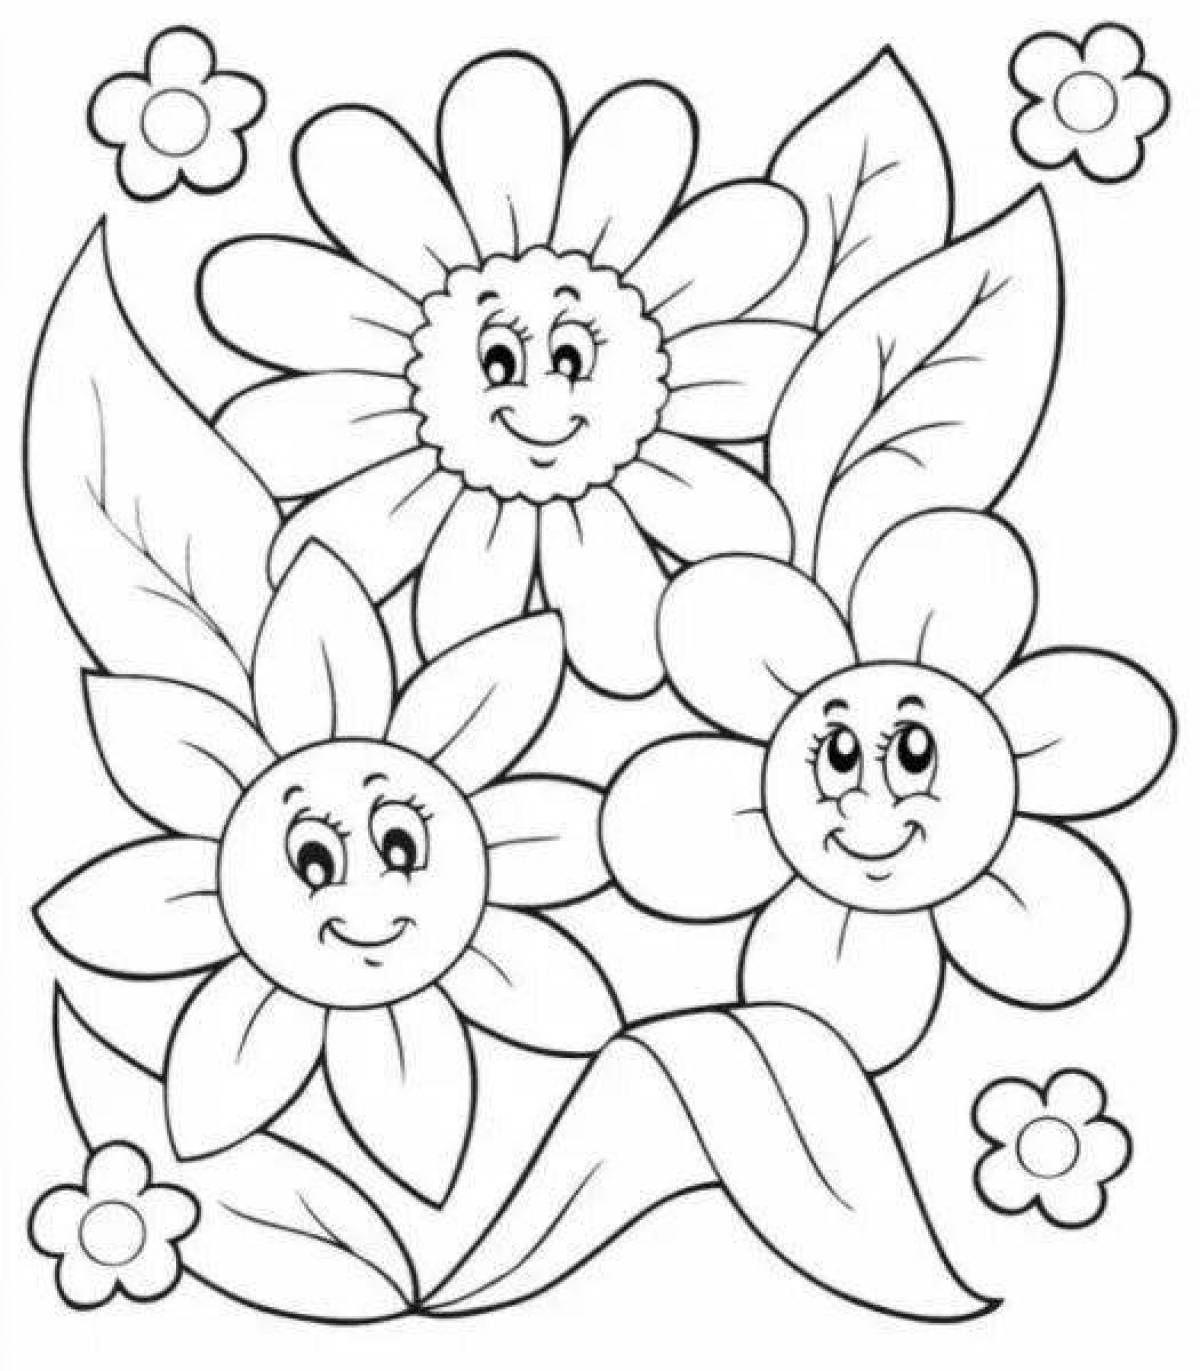 Dazzling flower coloring book for 3-4 year olds